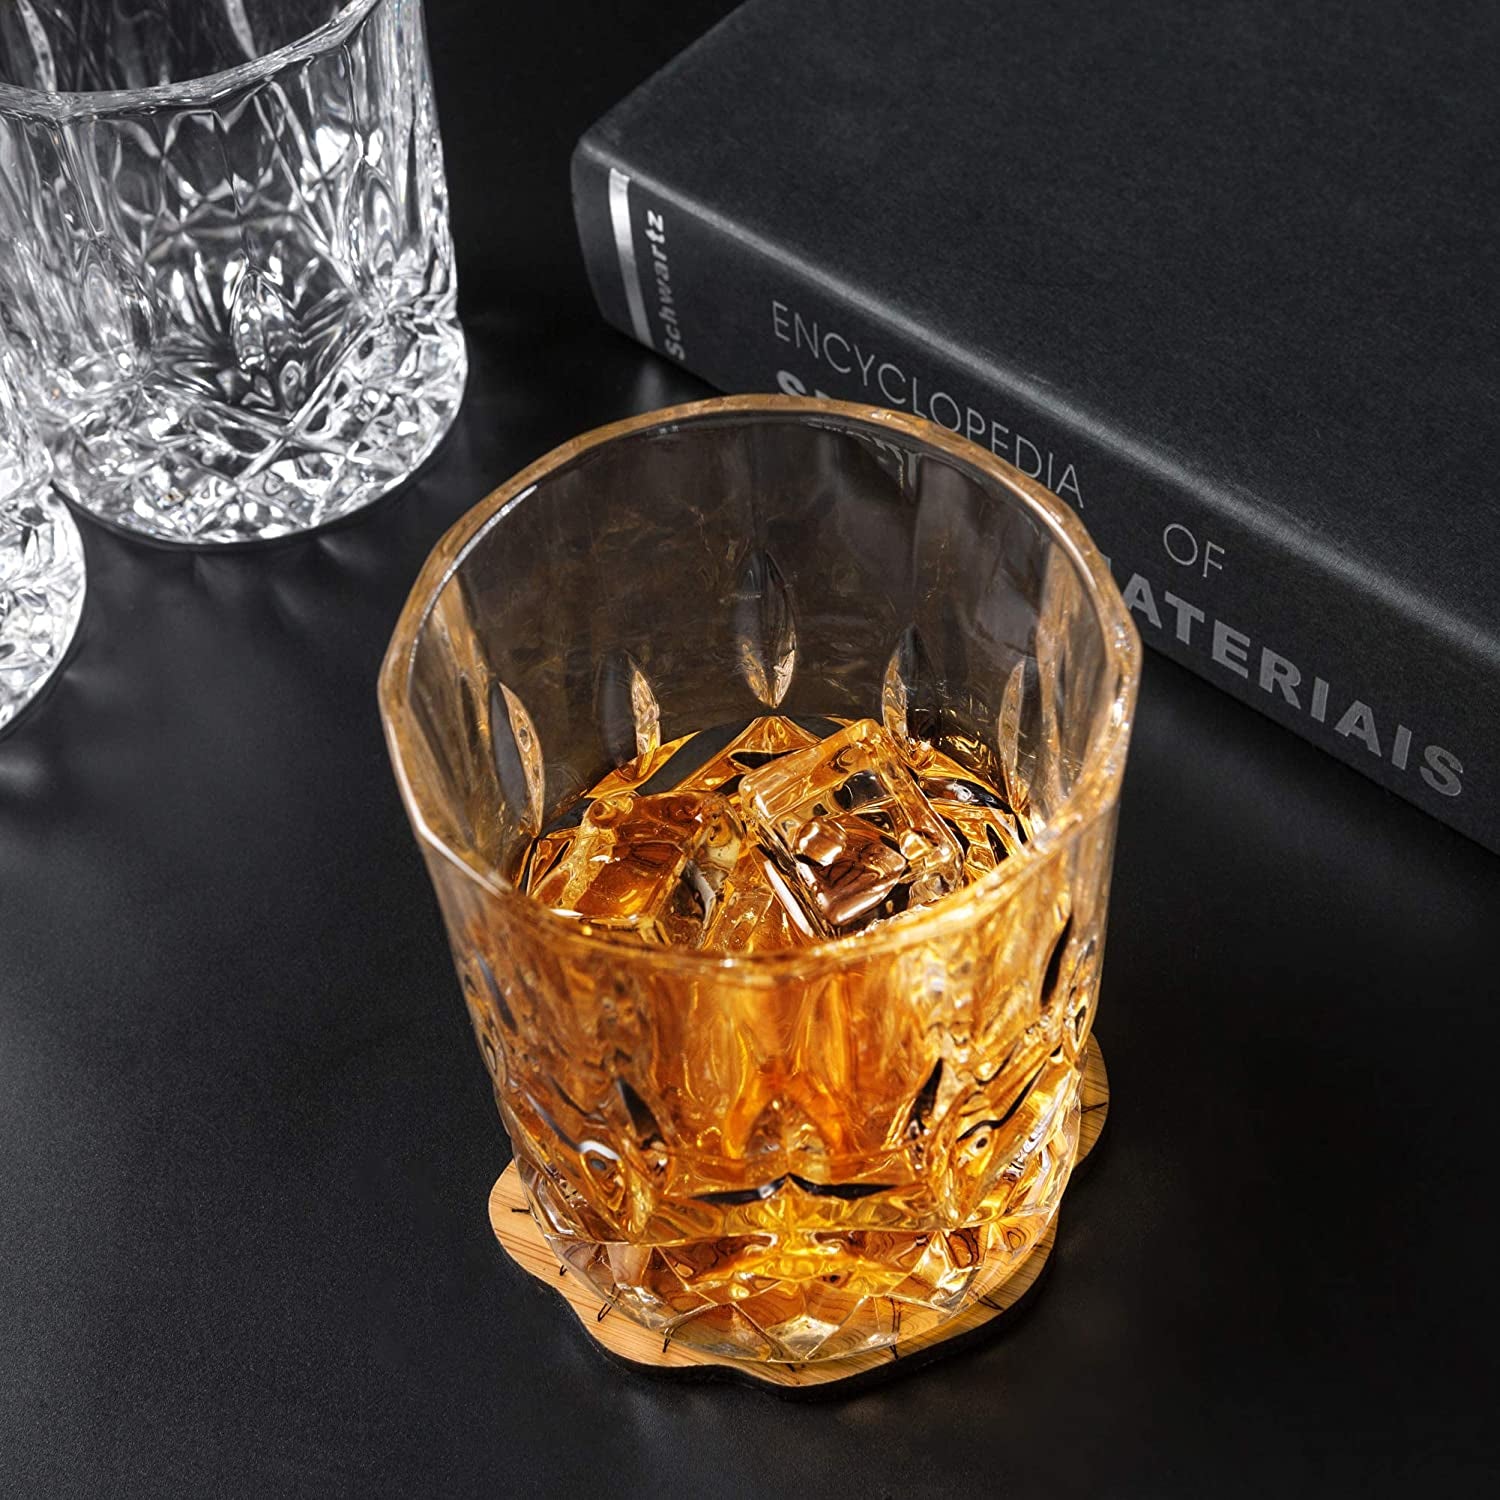 Old Fashioned Whiskey Glasses with Luxury Box - 10 Oz Rocks Barware for Scotch, Bourbon, Liquor and Cocktail Drinks - Set of 4